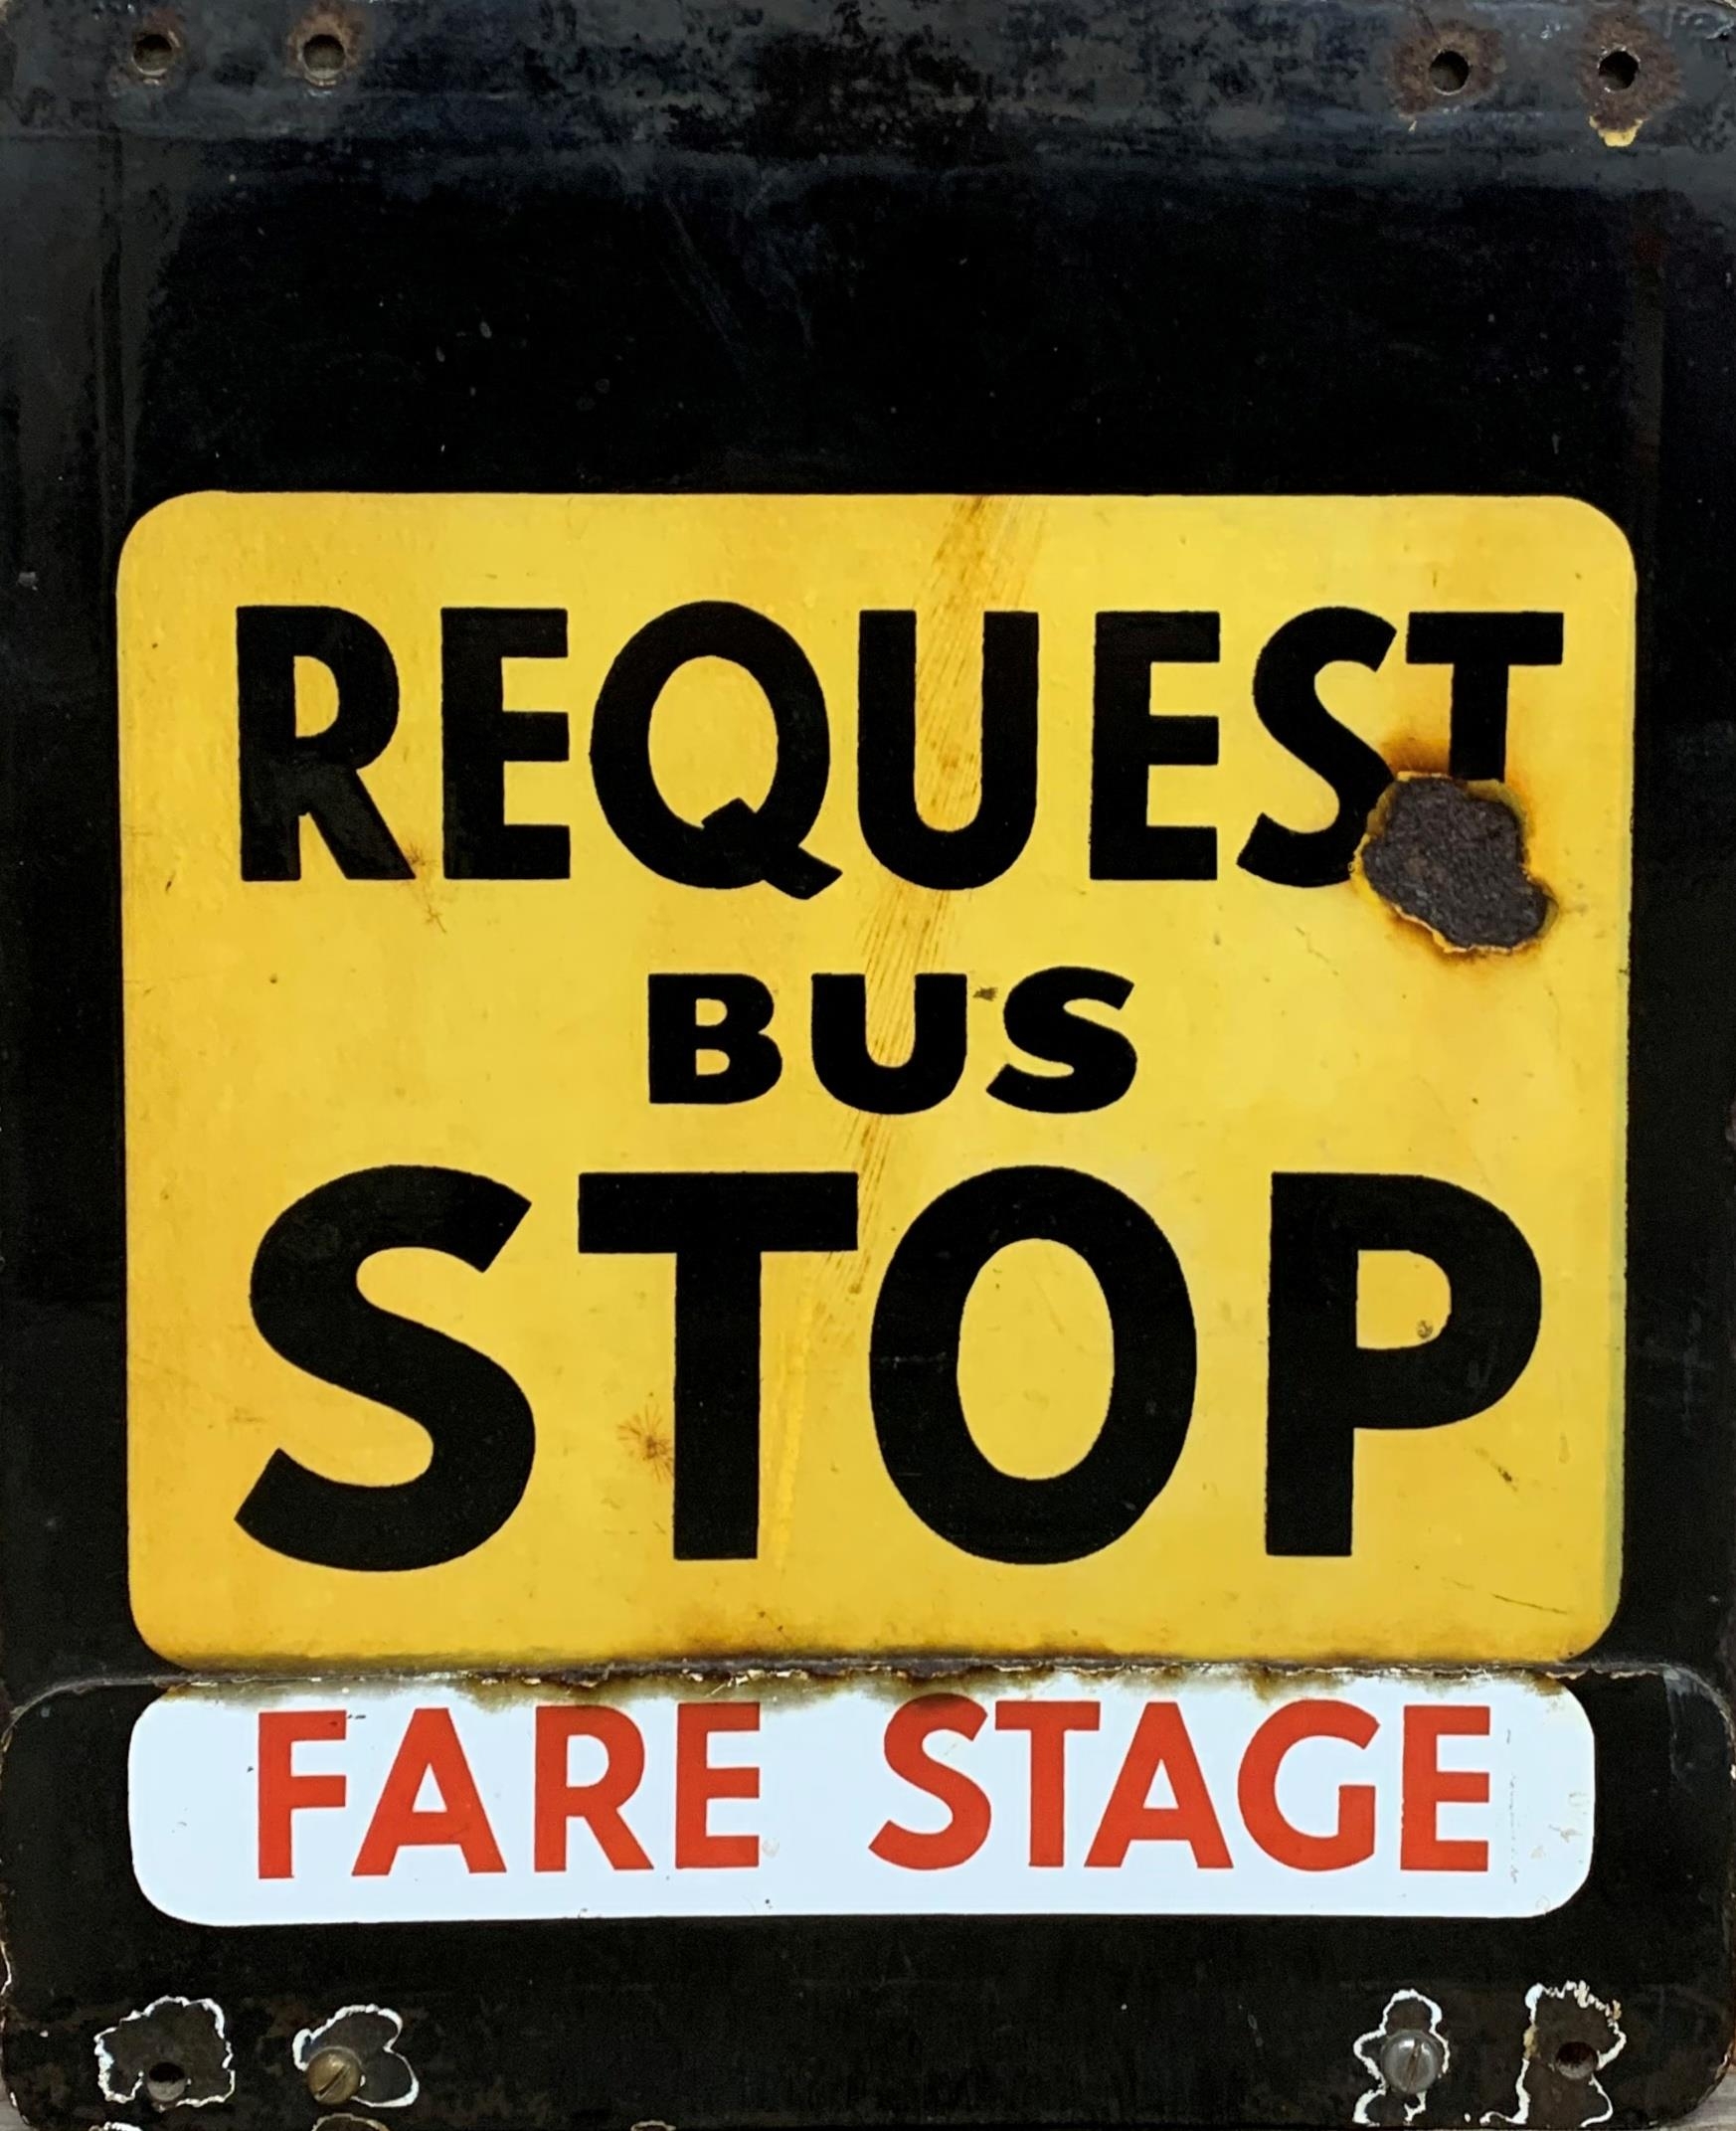 Vintage 'Request Bus Stop' yellow and black double sided enamel sign, 42cm x 34cm